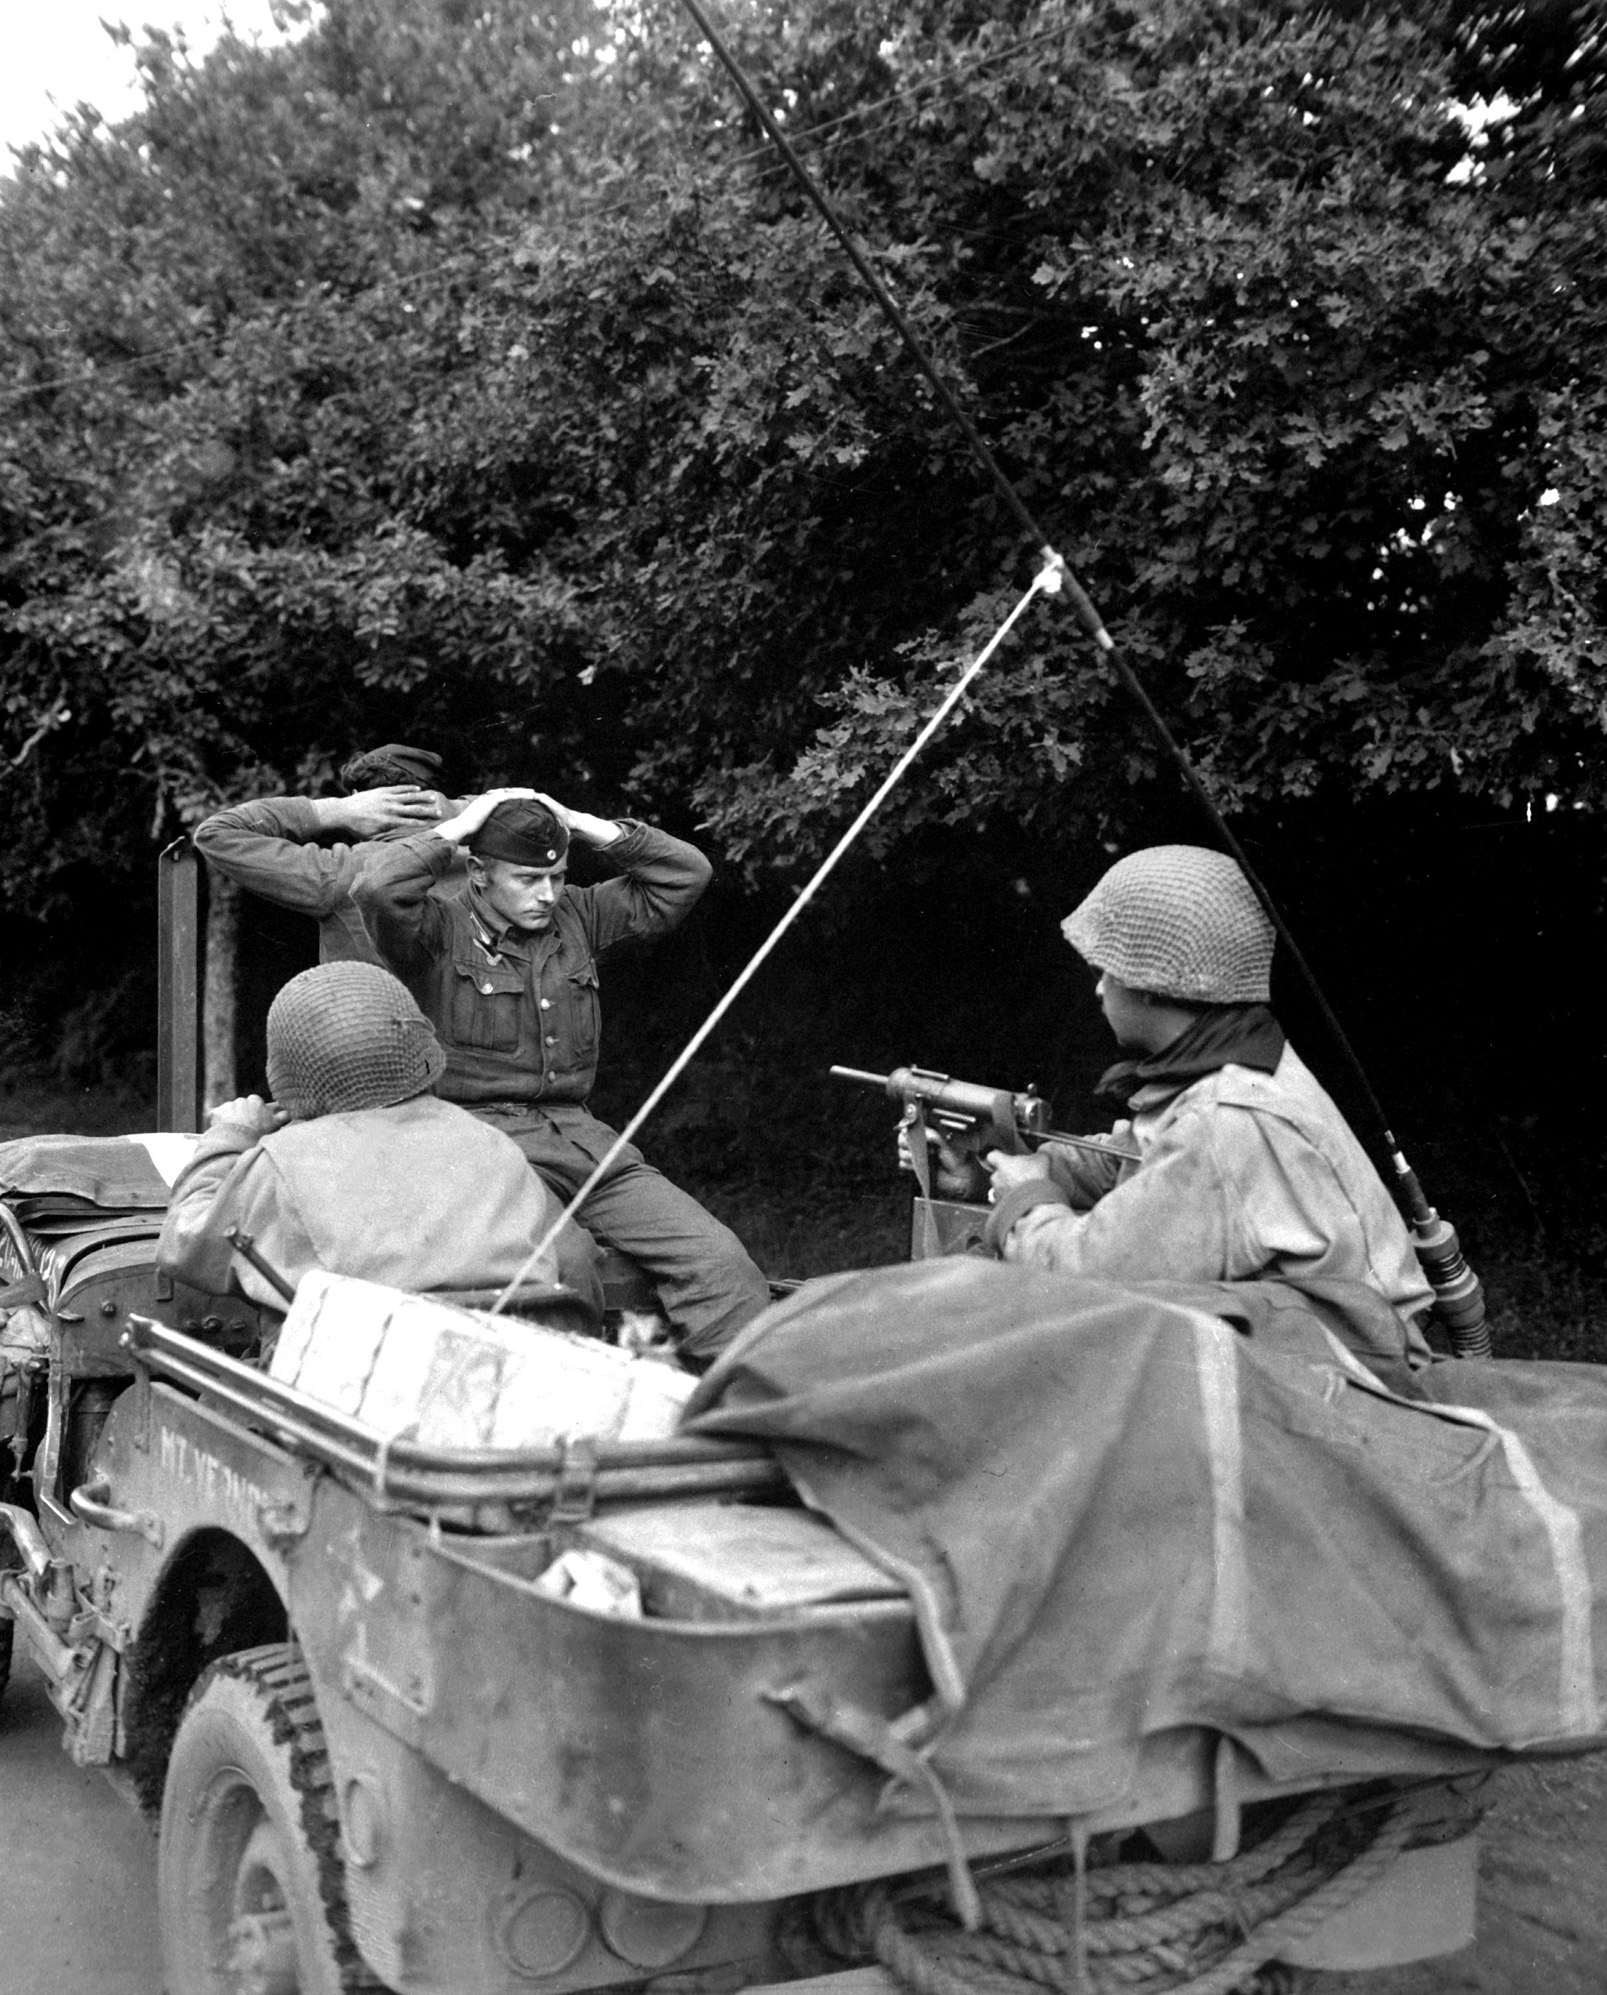 Their hands behind their heads, two German prisoners of war are guarded by an American soldier keeping watch and armed with an M3 Grease Gun.